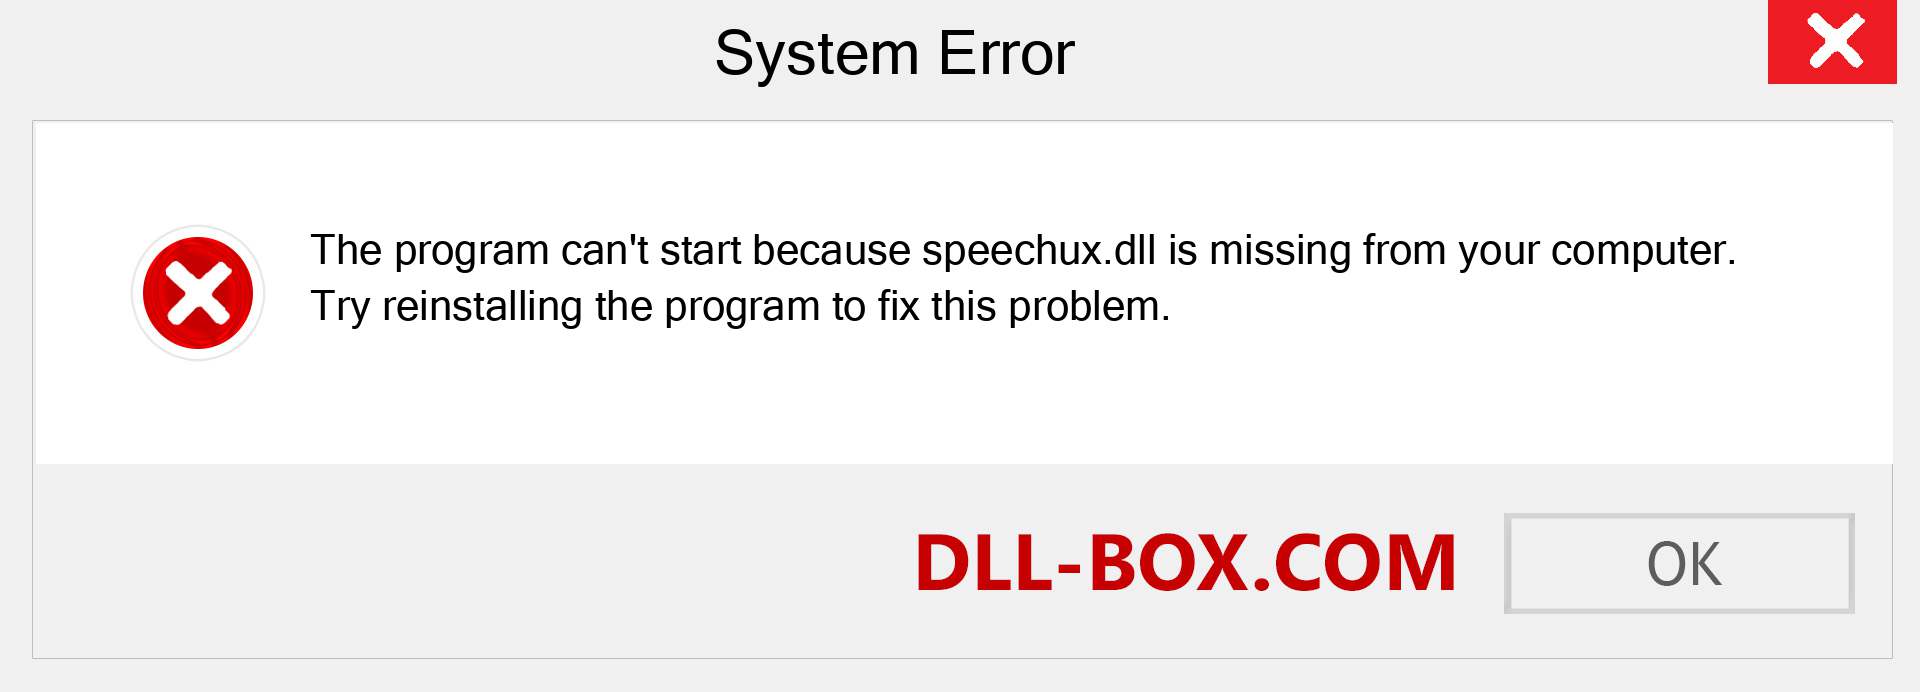  speechux.dll file is missing?. Download for Windows 7, 8, 10 - Fix  speechux dll Missing Error on Windows, photos, images